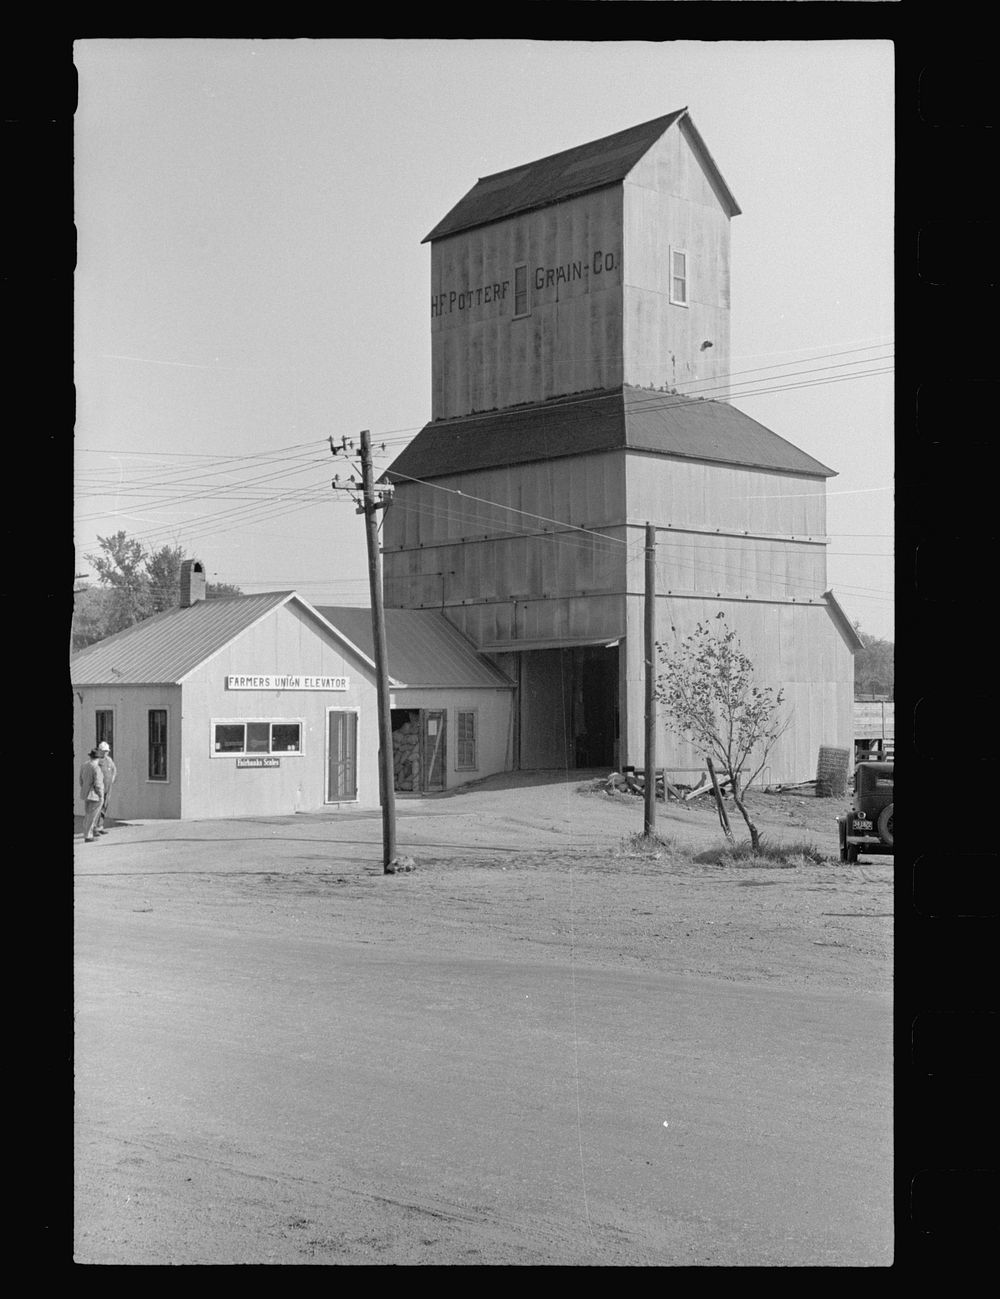 Farmer's Union Coop, elevator, Centralia, Kansas. This cooperative, which also runs a general store in town, has received a…